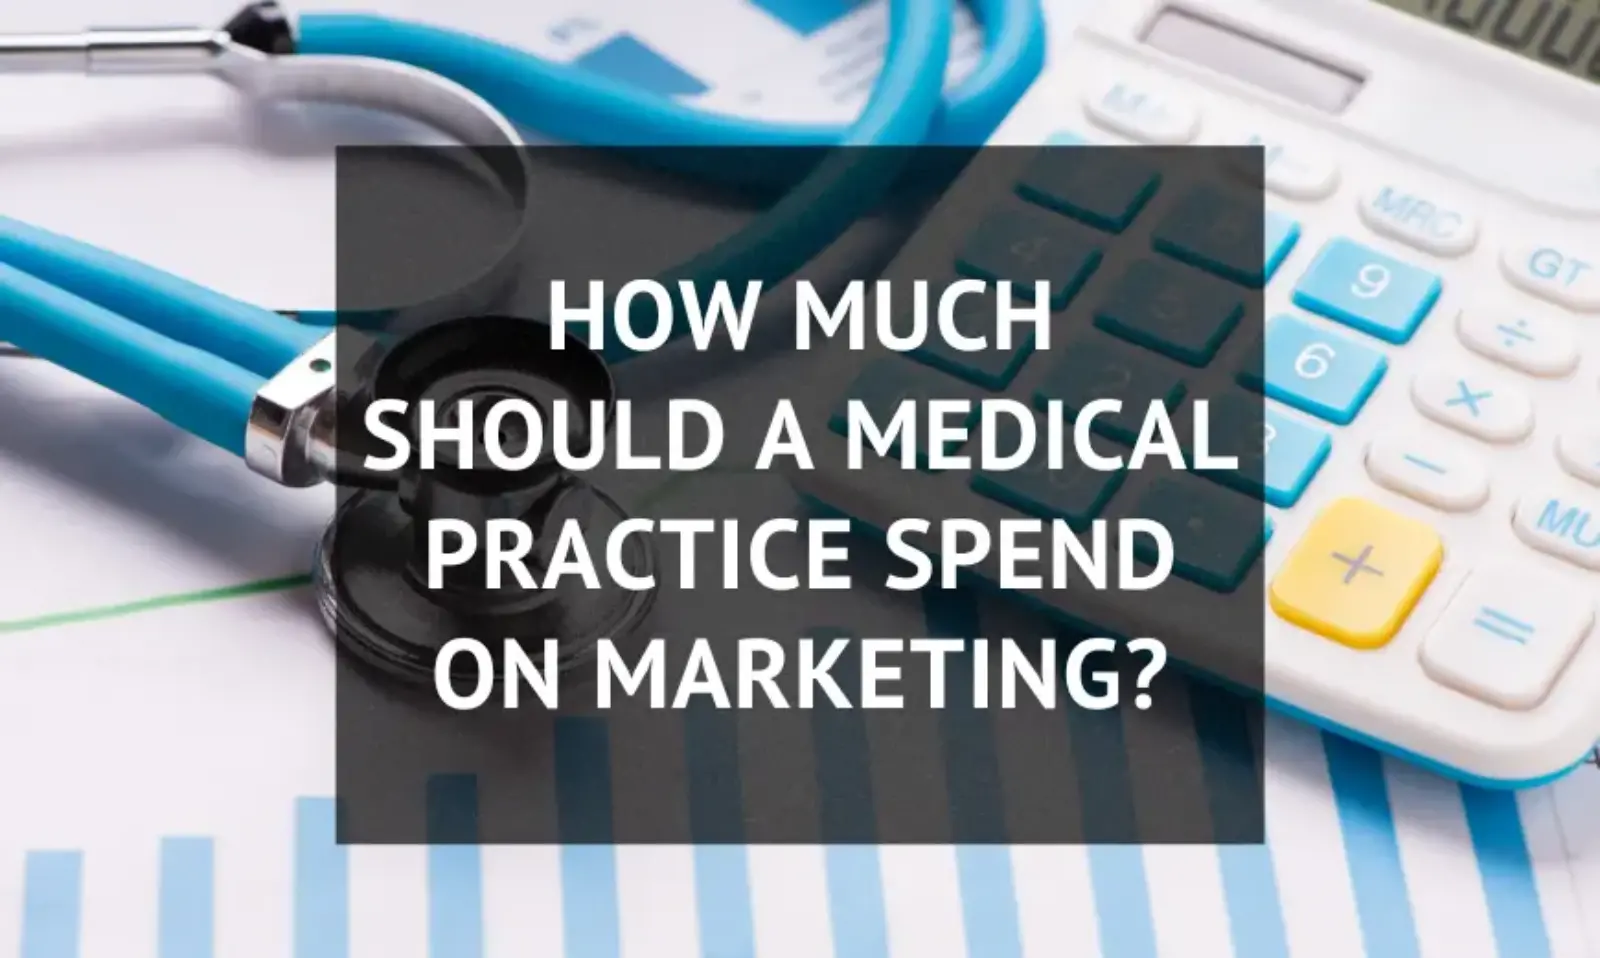 How Much Should a Medical Practice Spend on Marketing